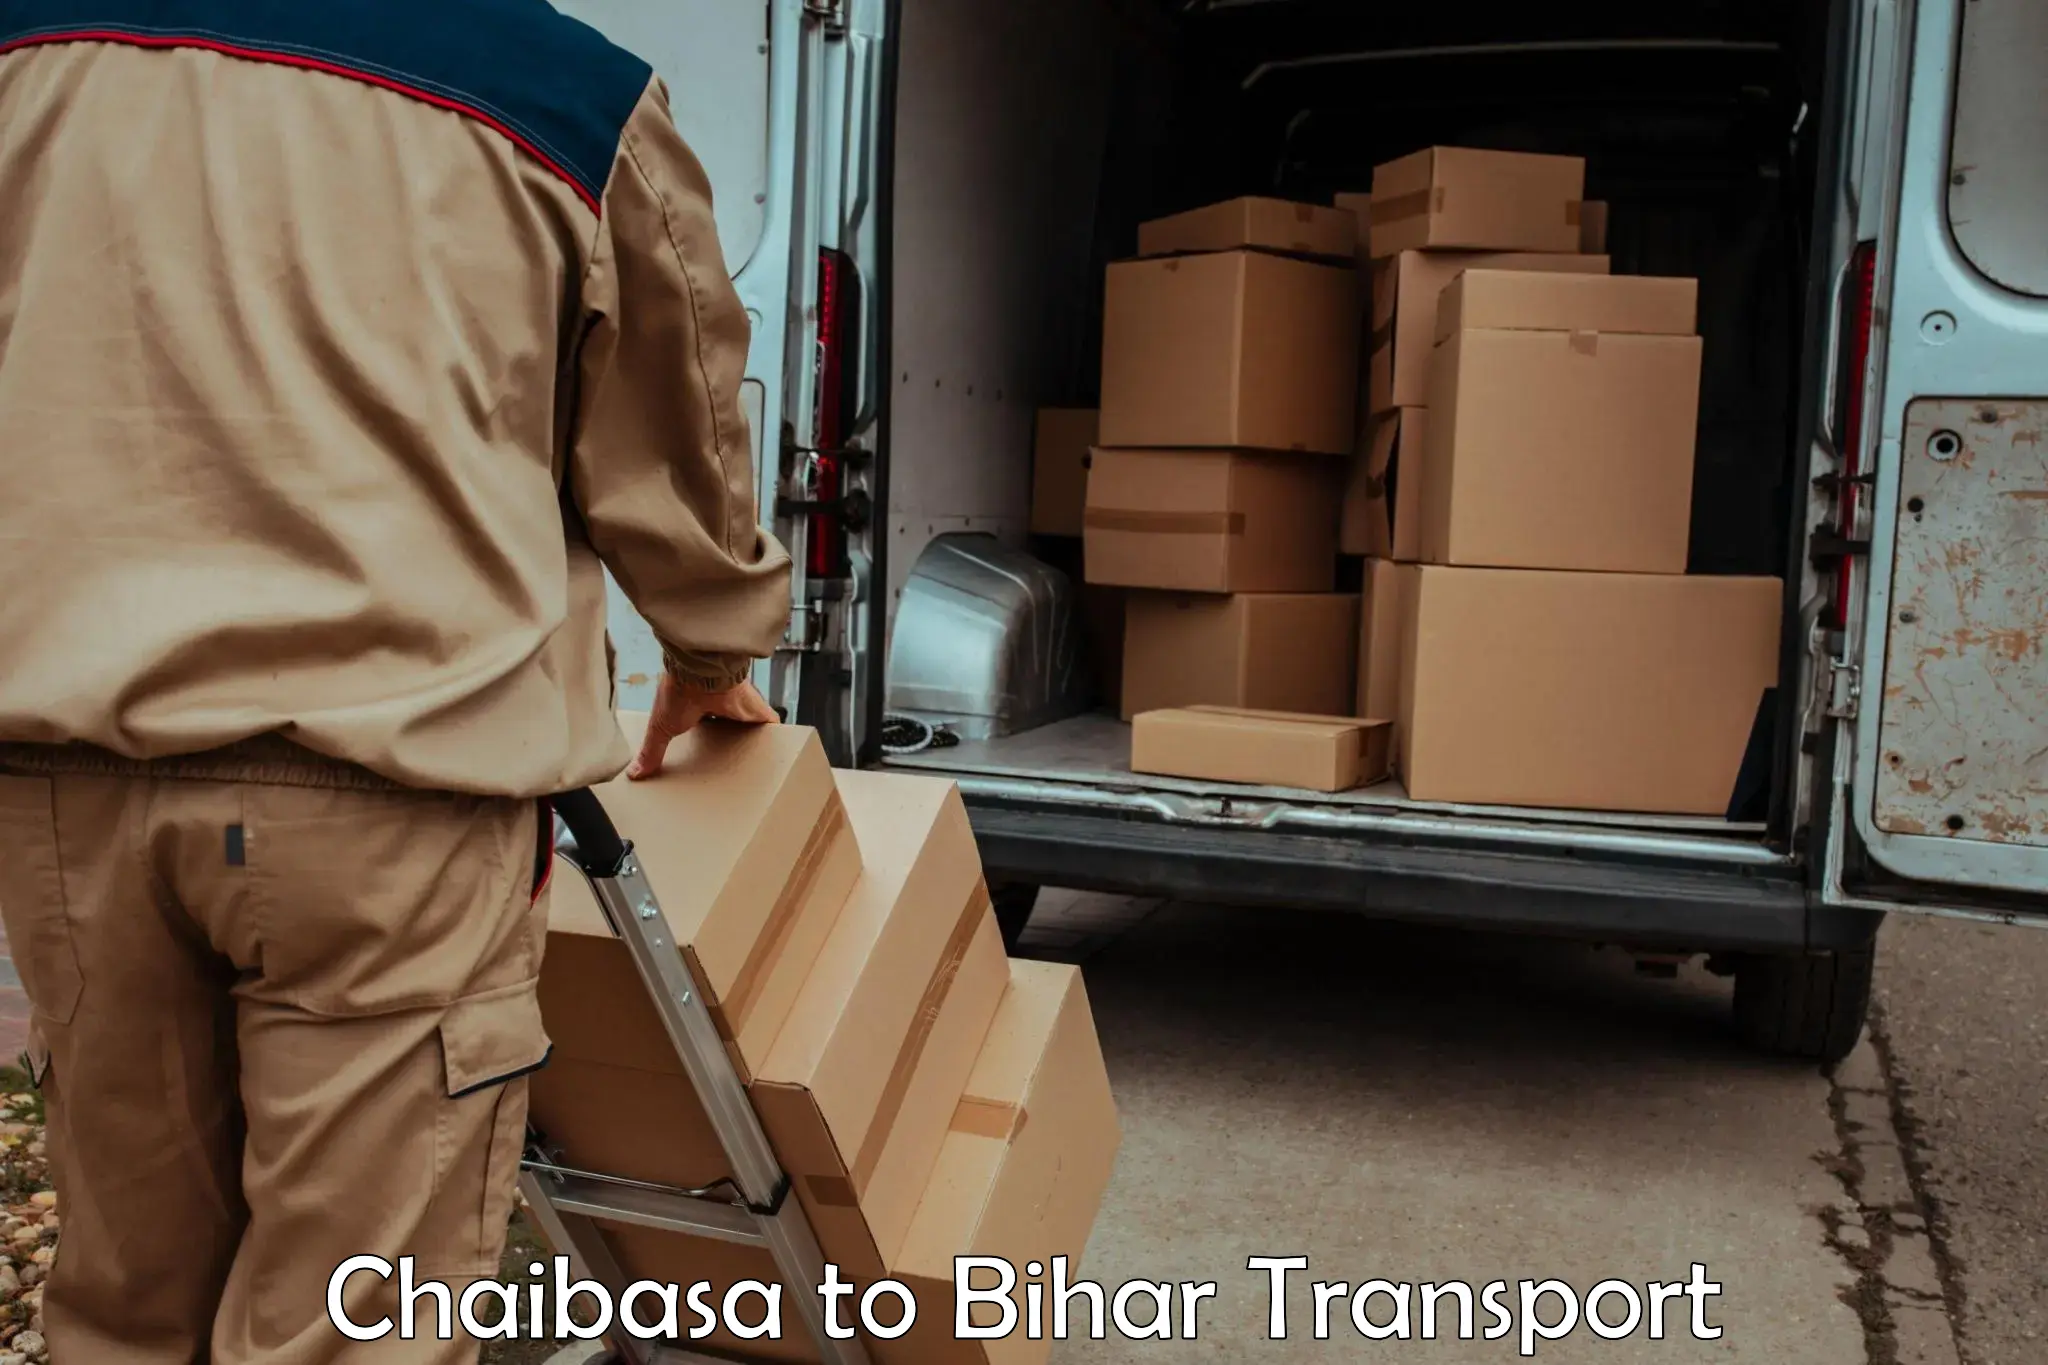 Truck transport companies in India Chaibasa to Chakia